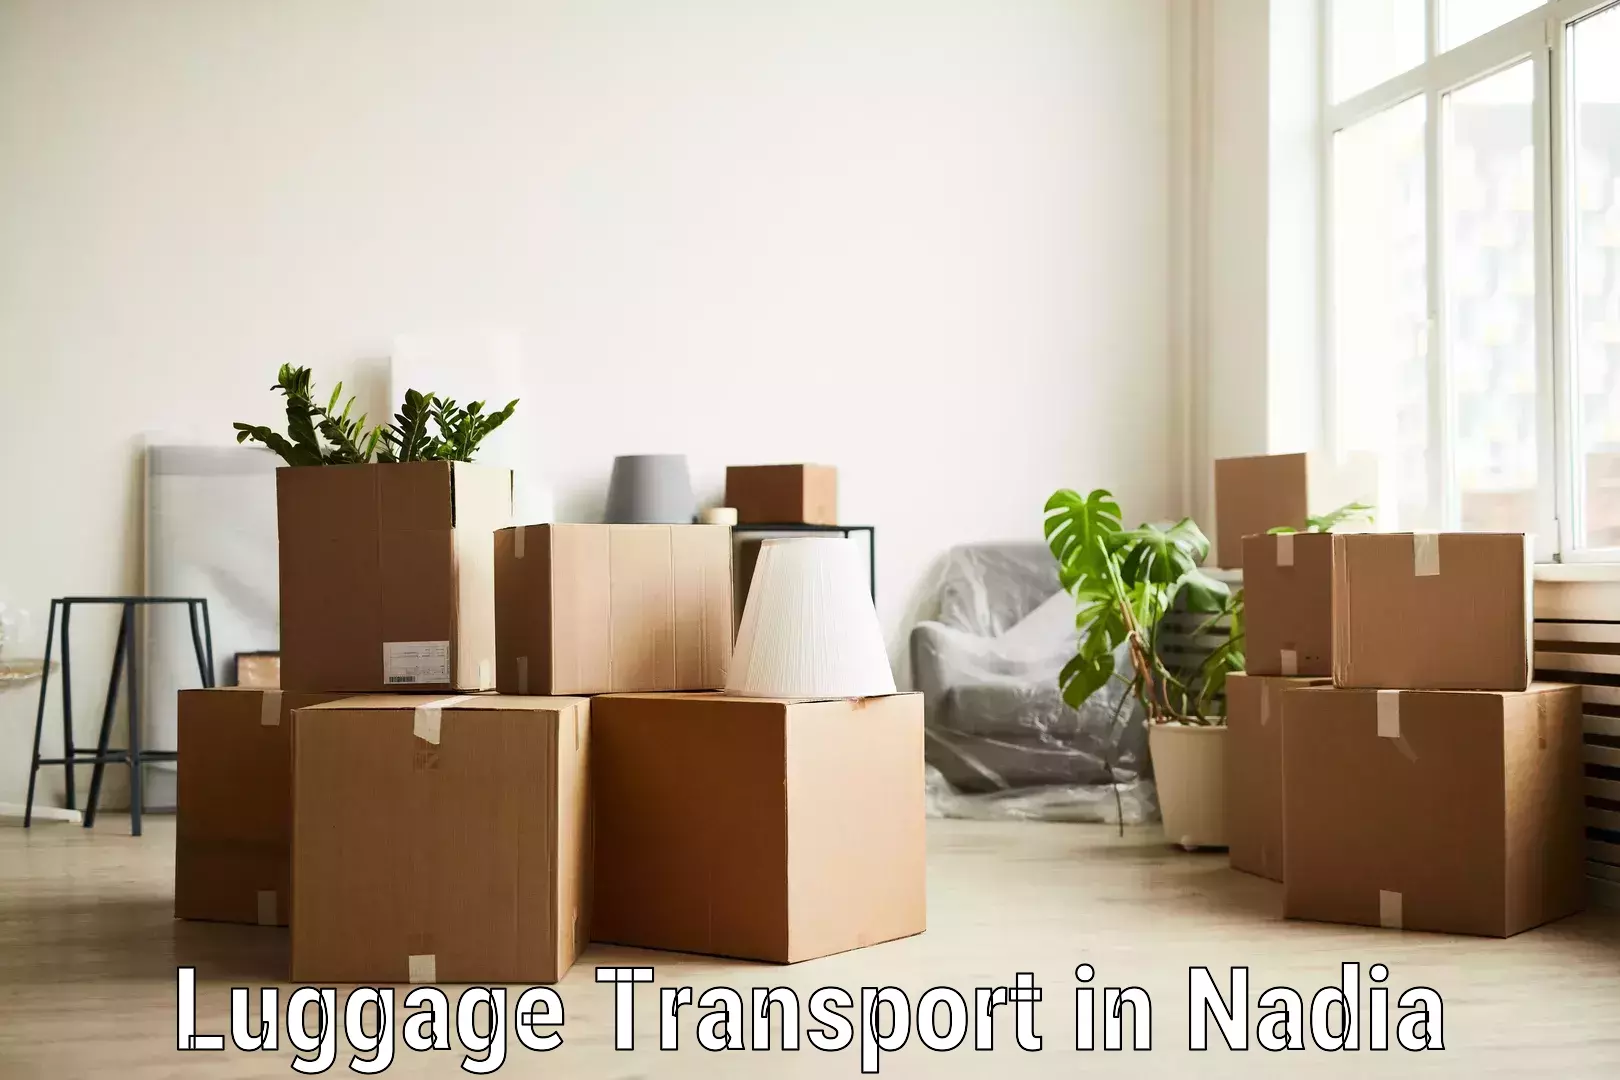 Baggage handling services in Nadia